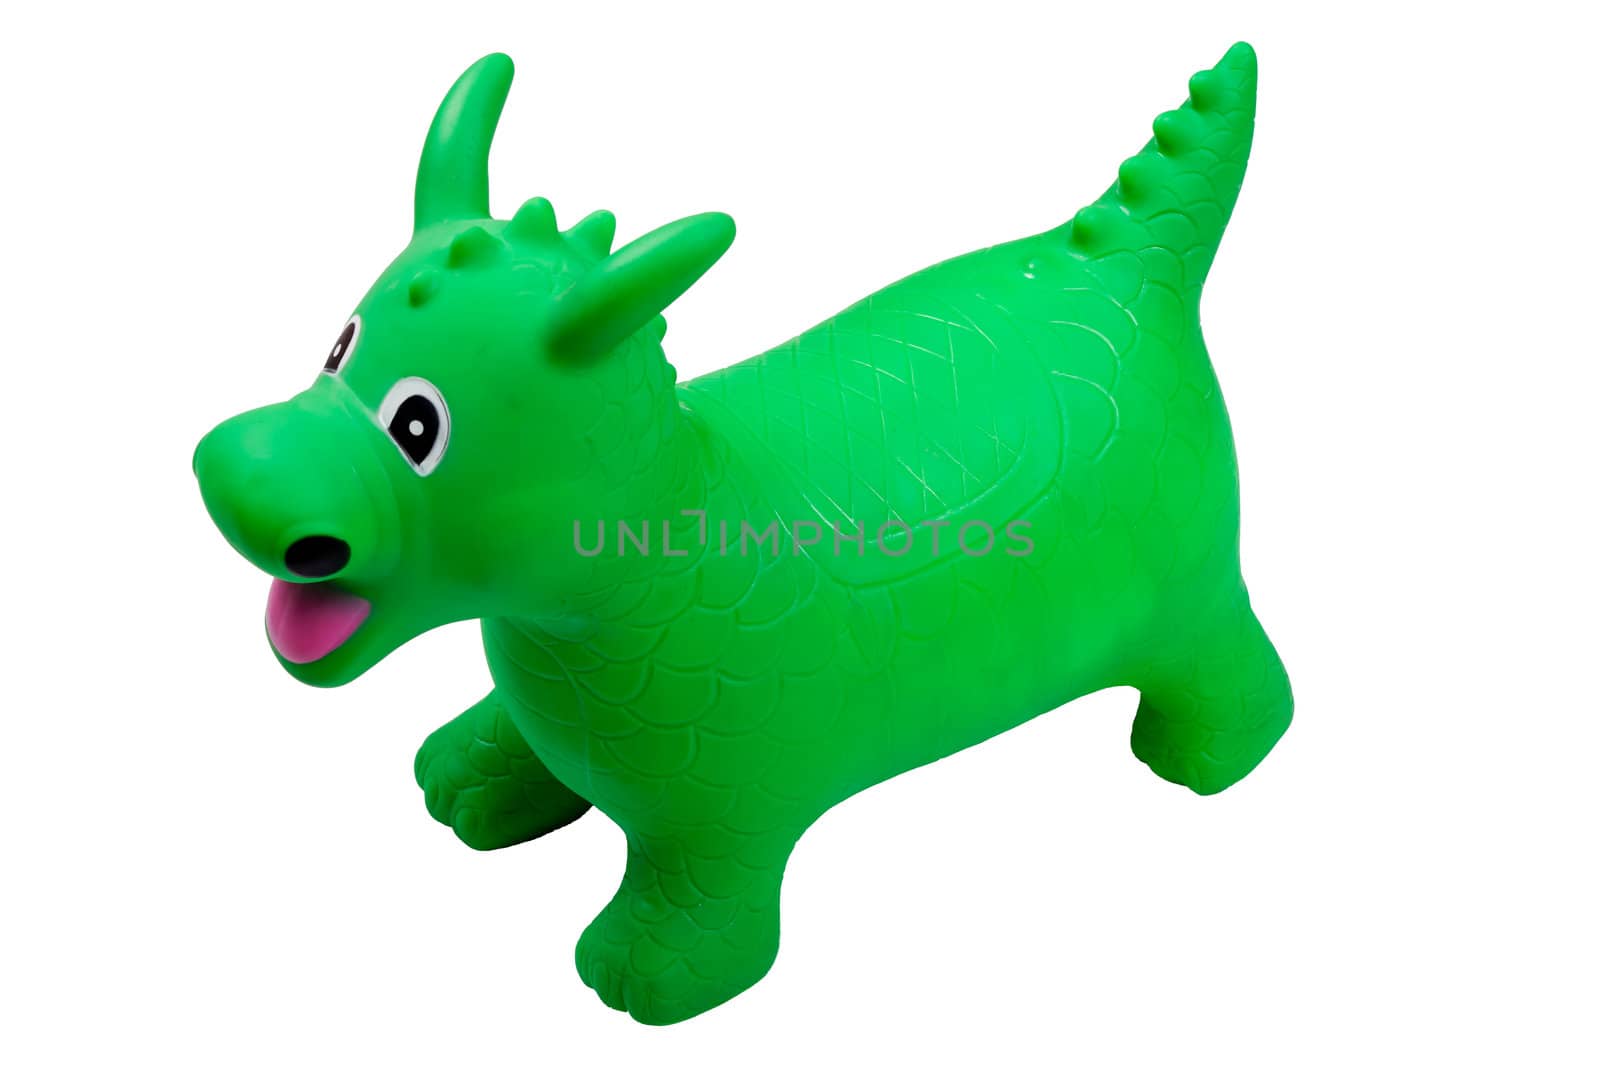 Green inflatable toy dragon by lavsen